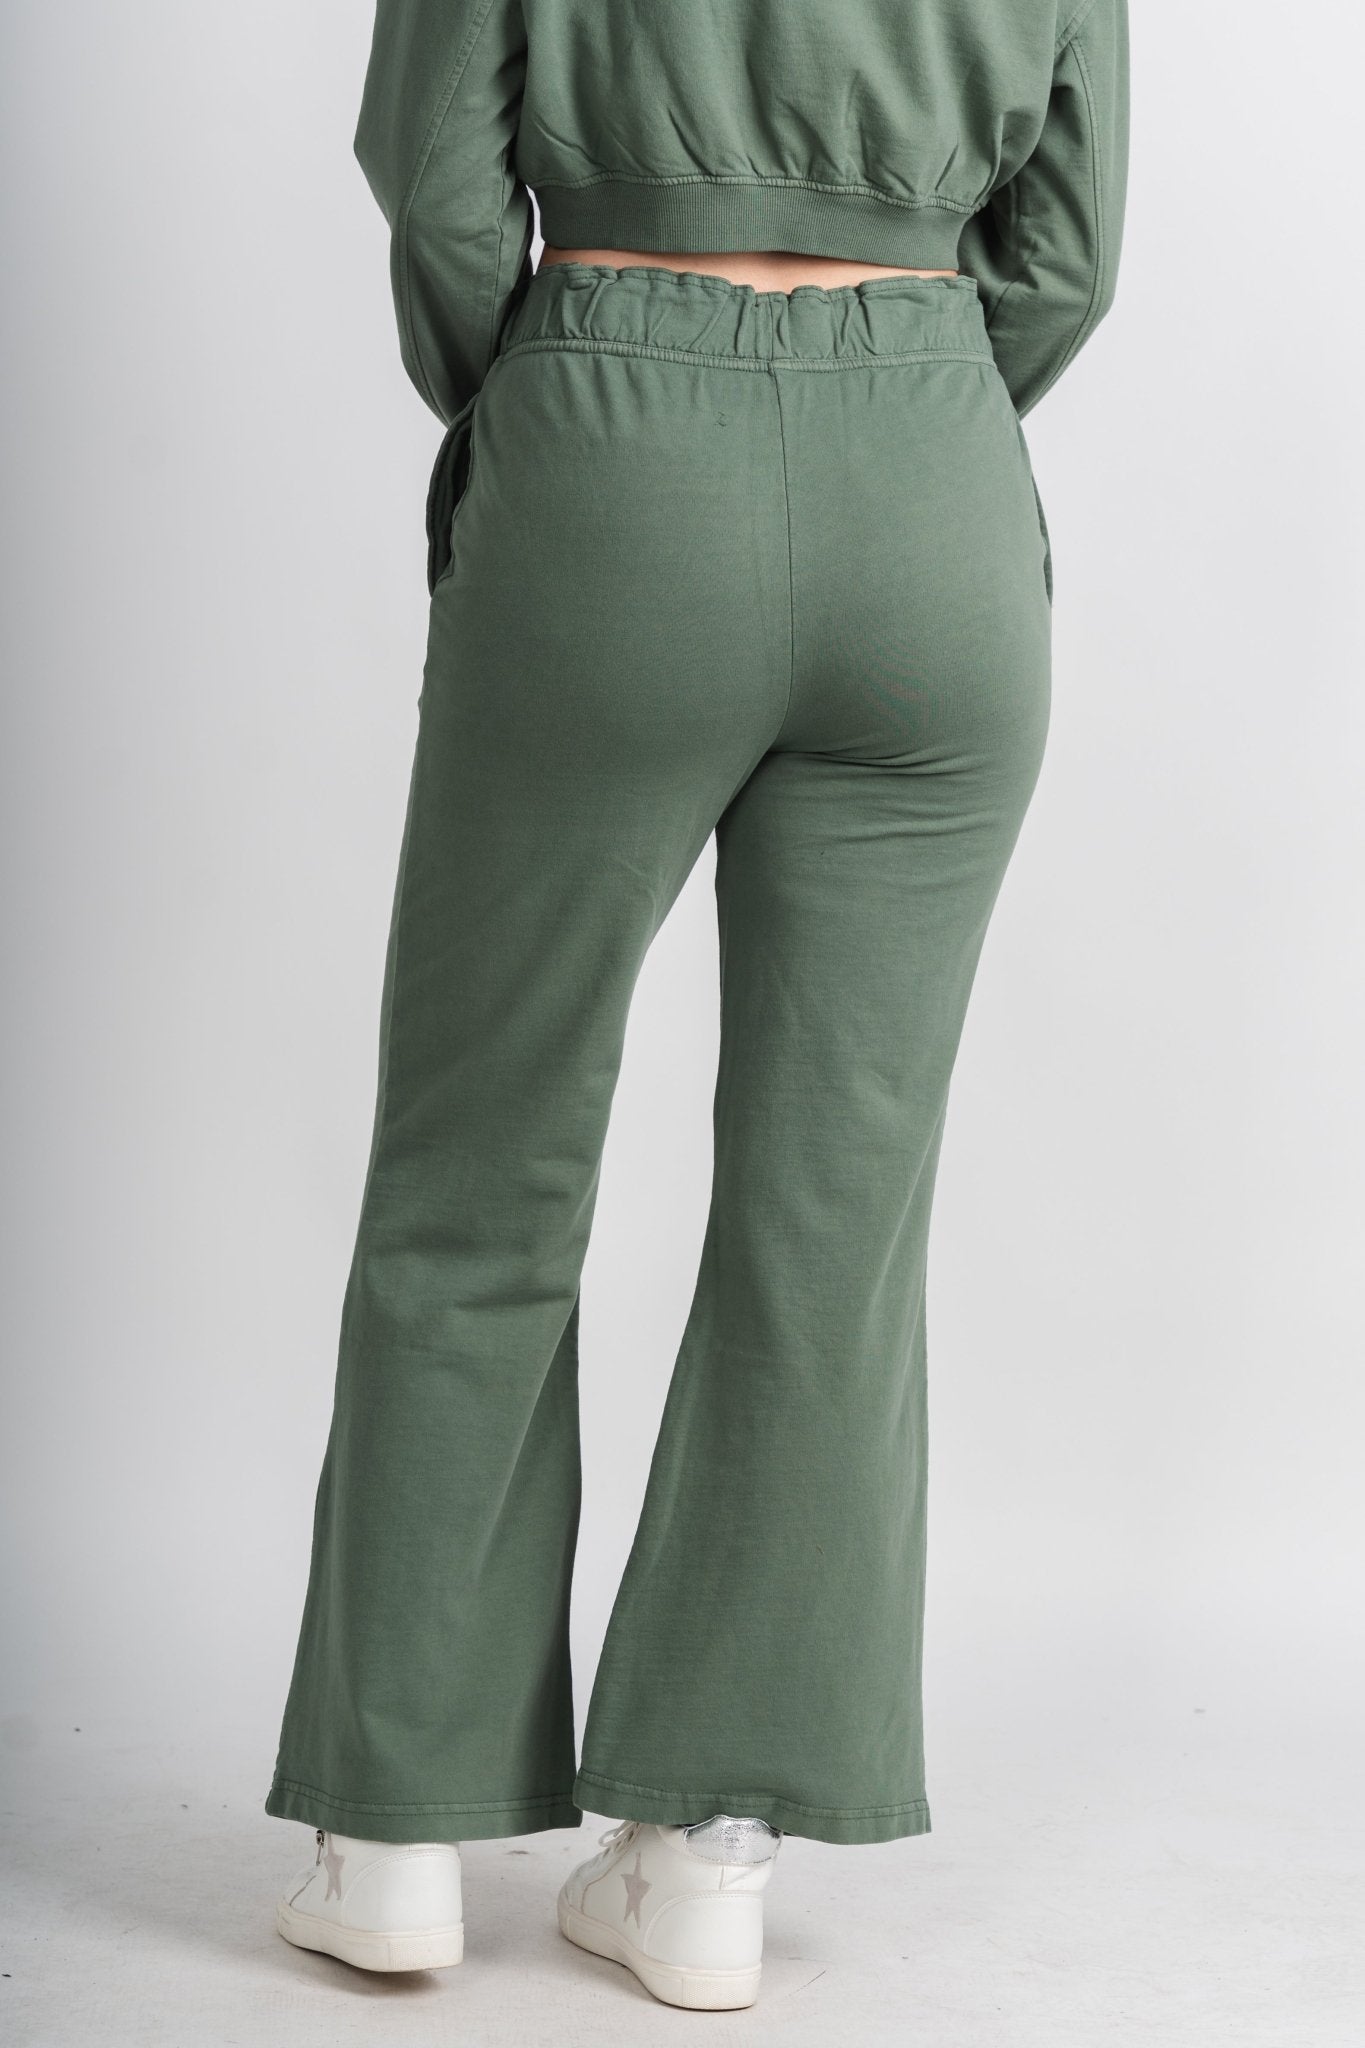 Mineral sweatpants gray green - Adorable Pants - Stylish Comfortable Outfits at Lush Fashion Lounge Boutique in OKC